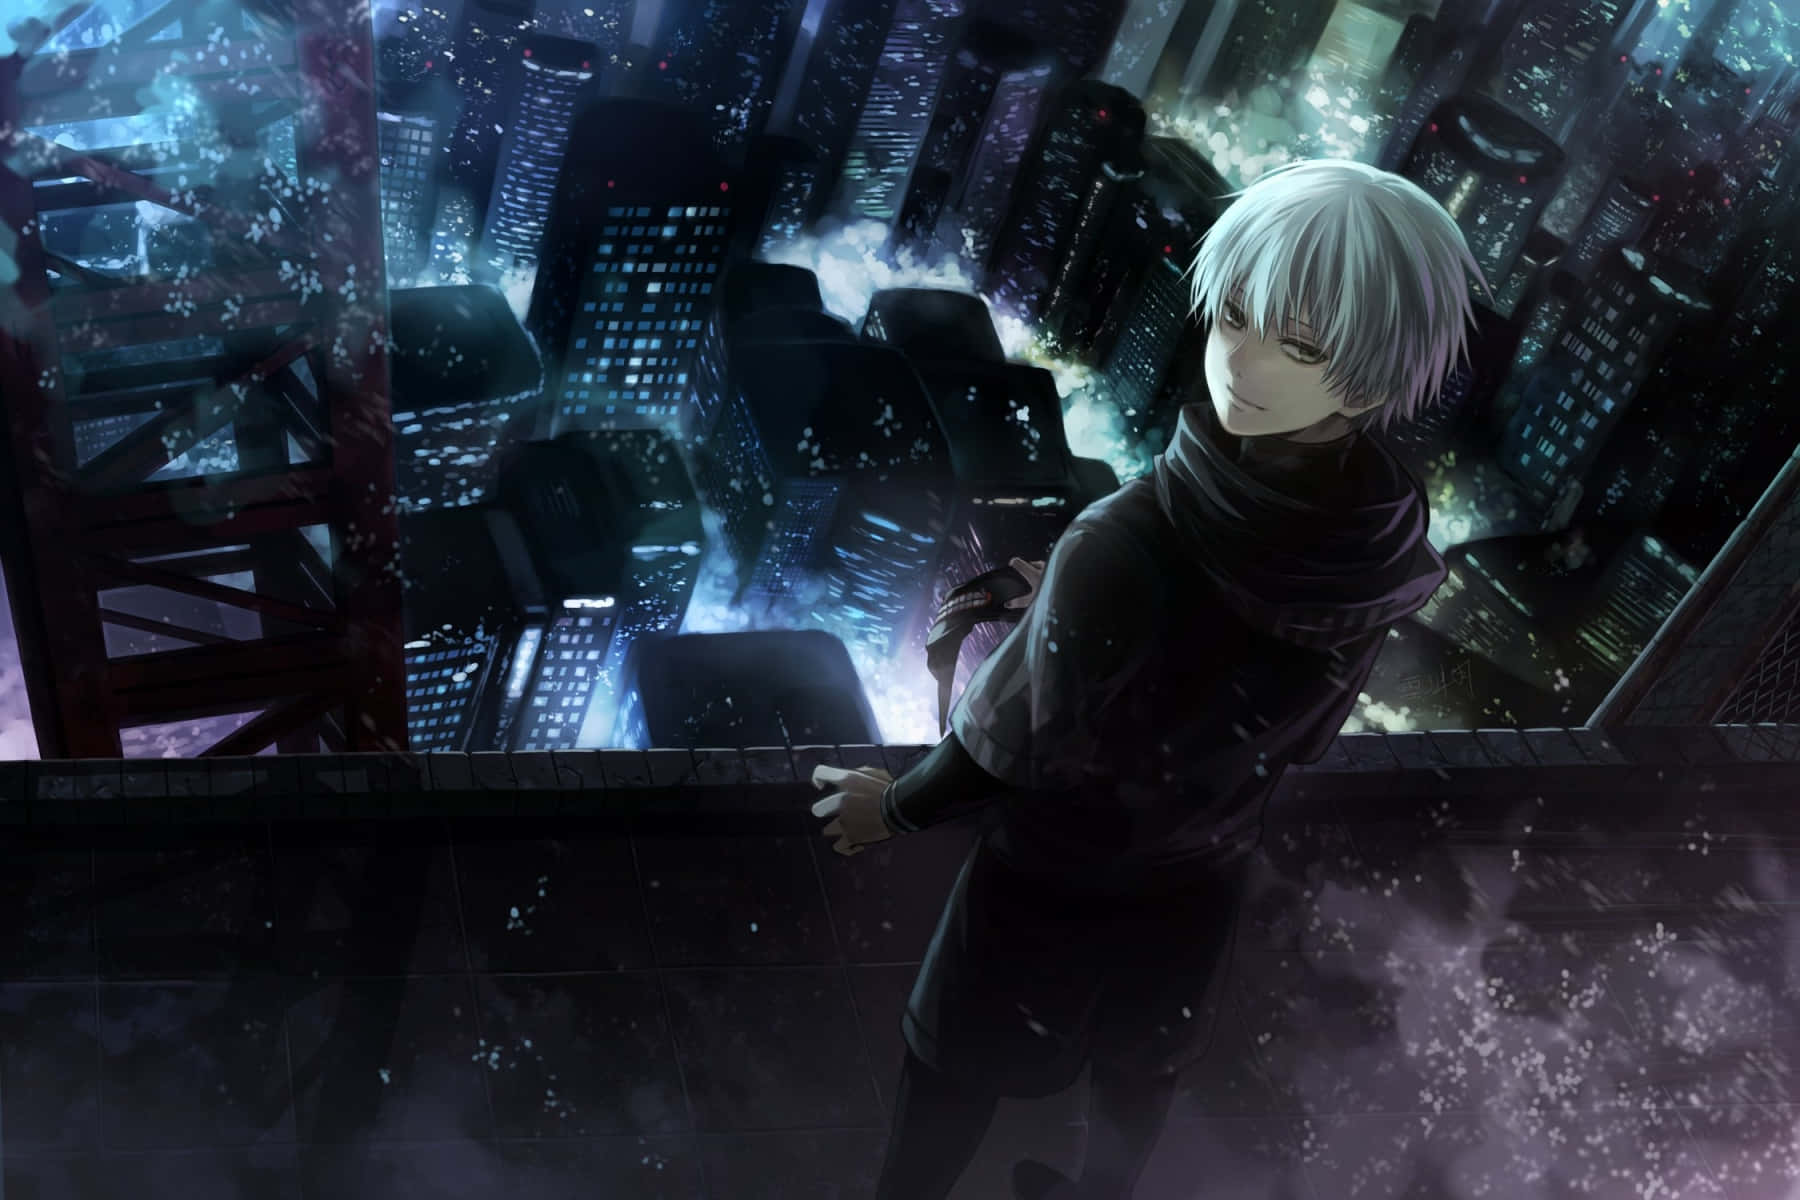 Tormented by the Society – Tokyo Ghoul